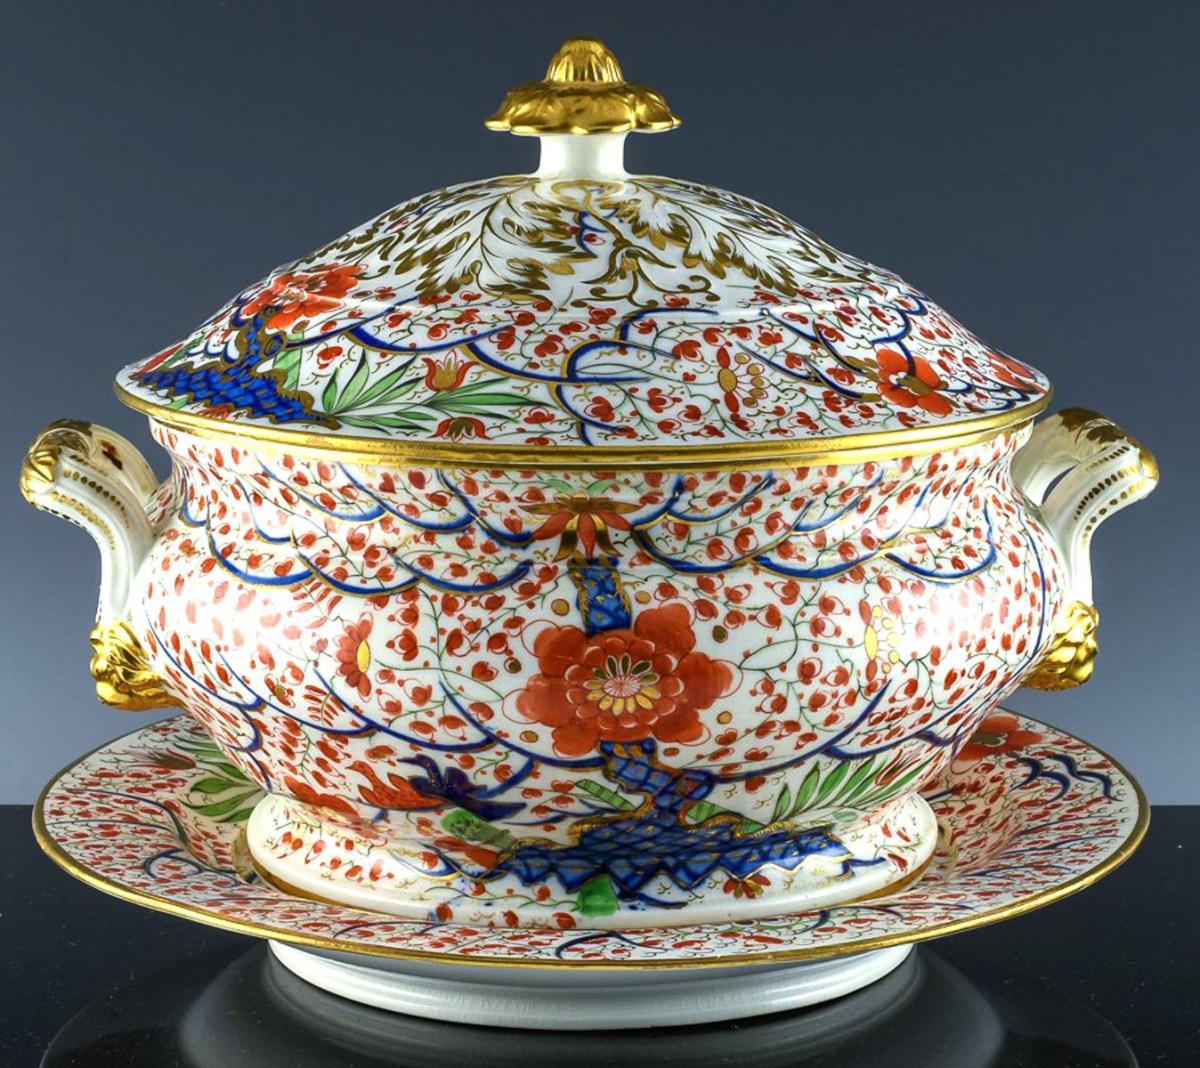 Chamberlain Worcester Porcelain Soup Tureen, Cover and Stand, Tree of Life Pattern, Circa 1818-22